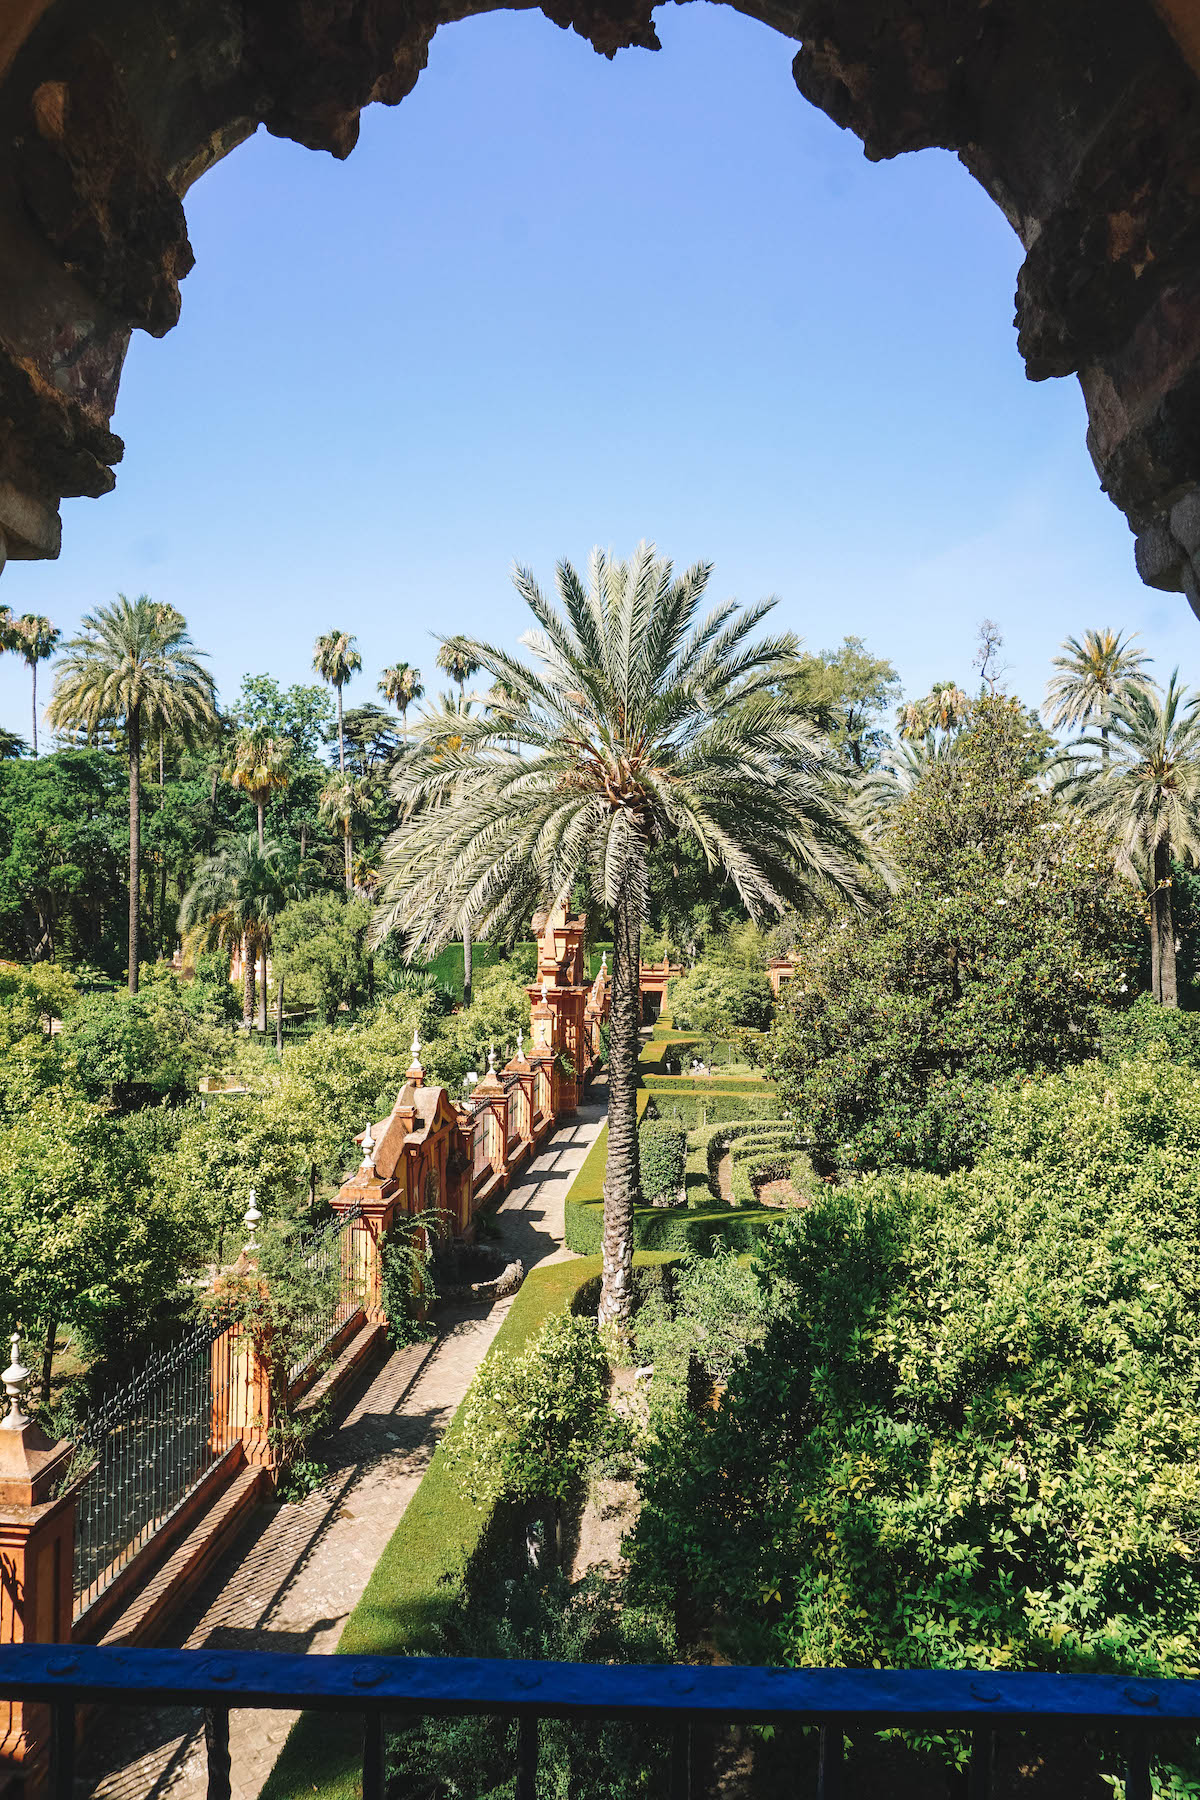 View of the Real Alcazar gardens in Seville.